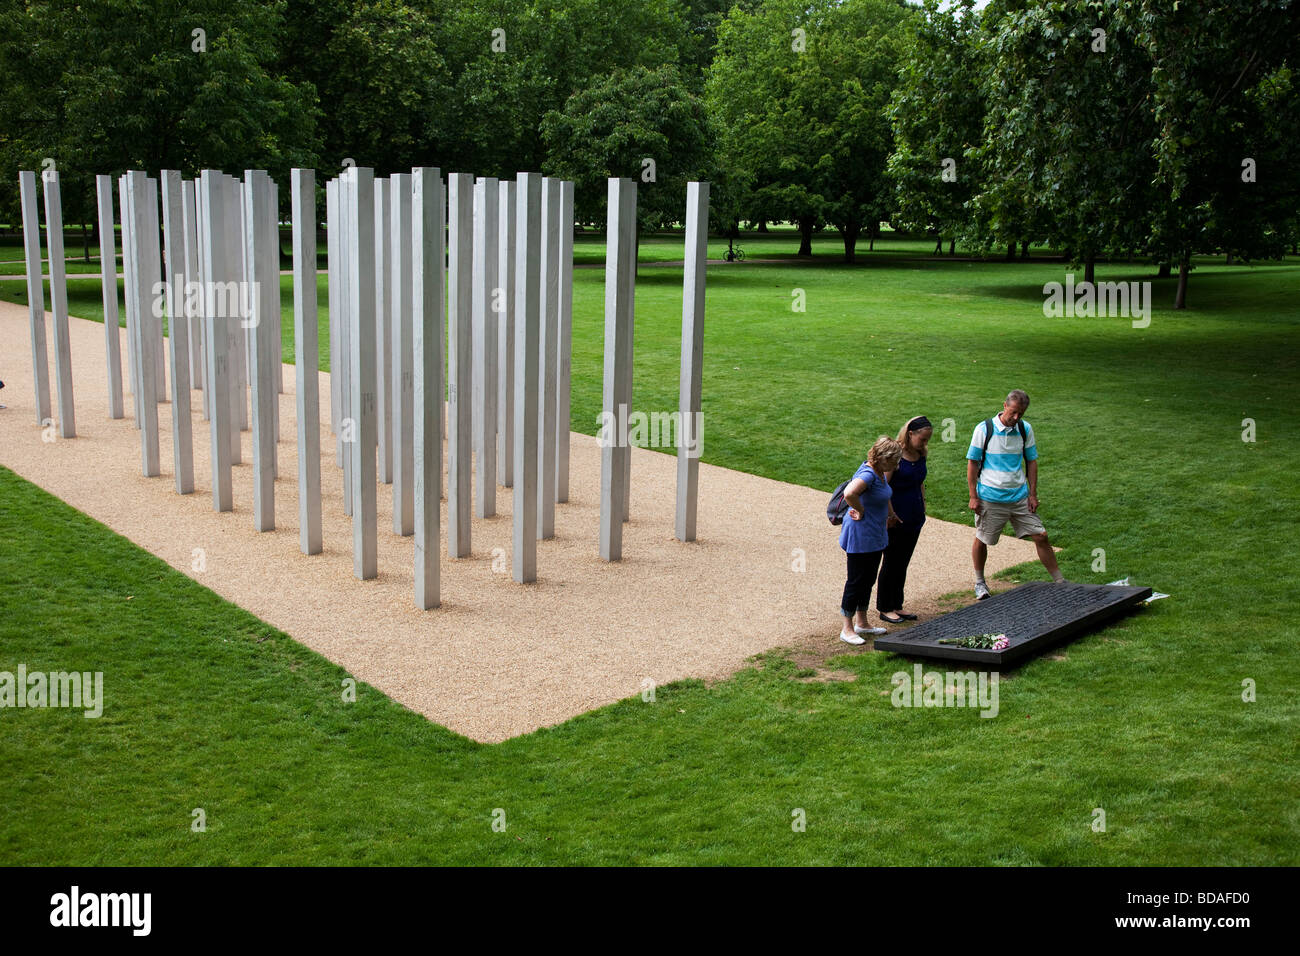 Memorial to the victims of the July 7th bombings in London. These uprights each mark one victim of the terrorist attacks. Stock Photo